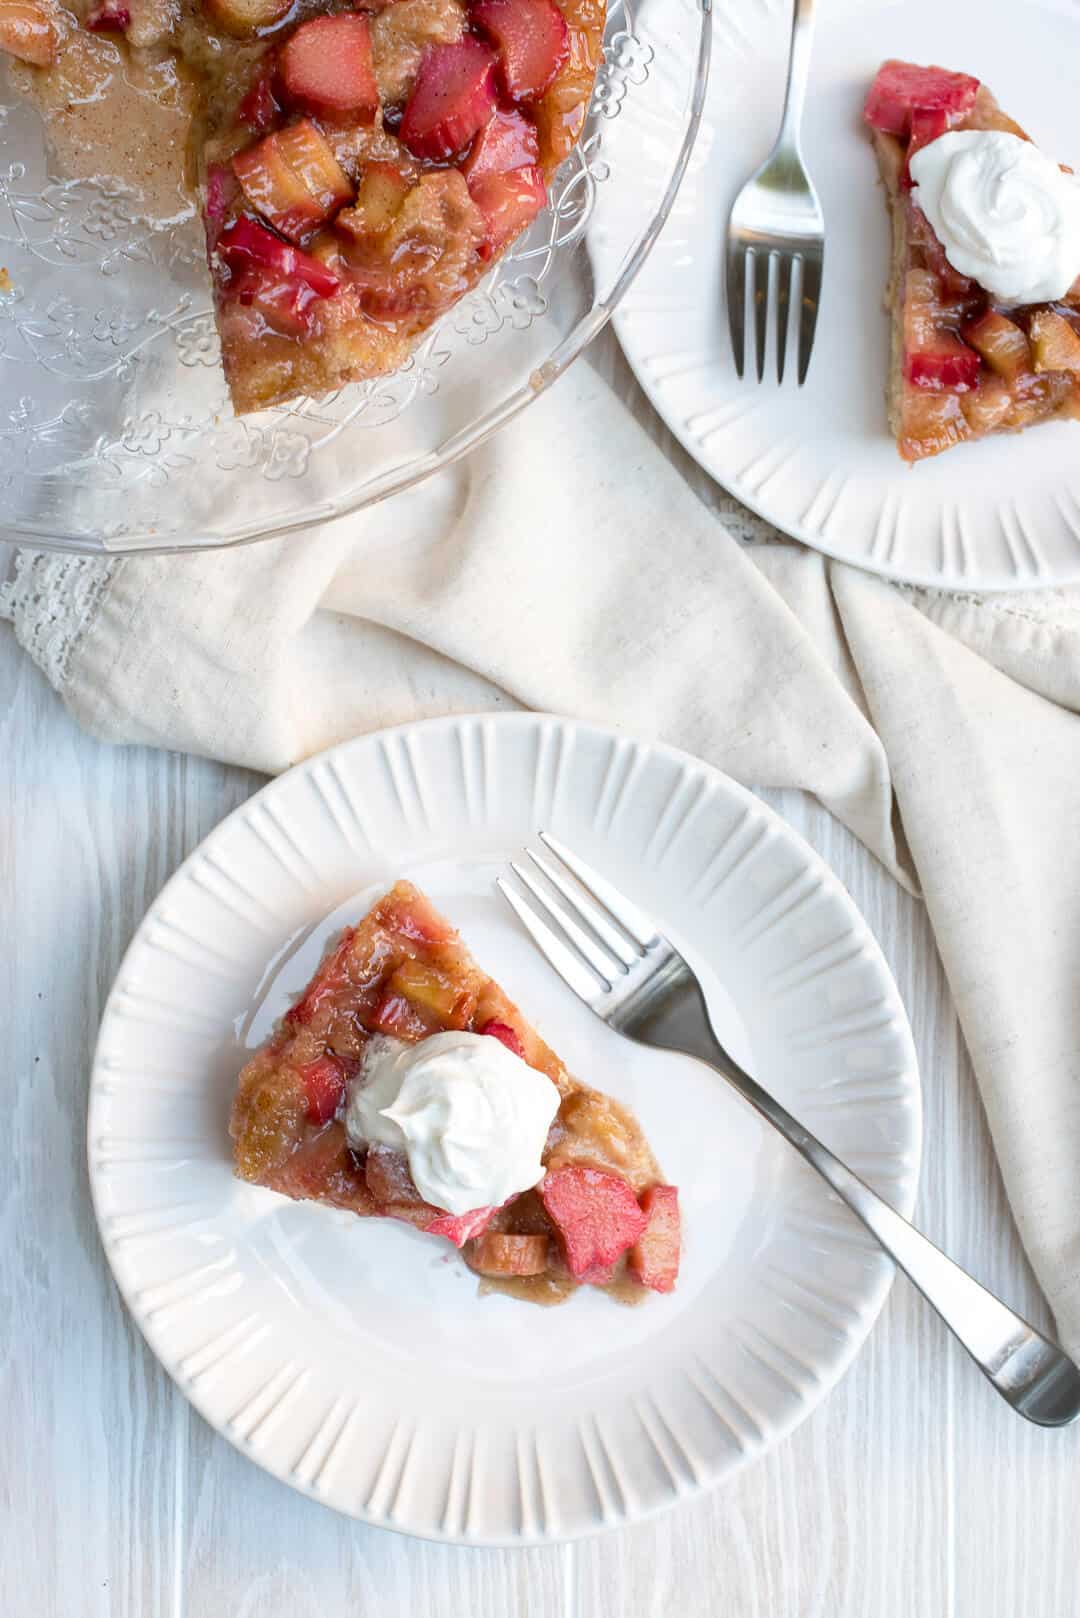 A rhubarb cake topped with whipped cream on a white plate.